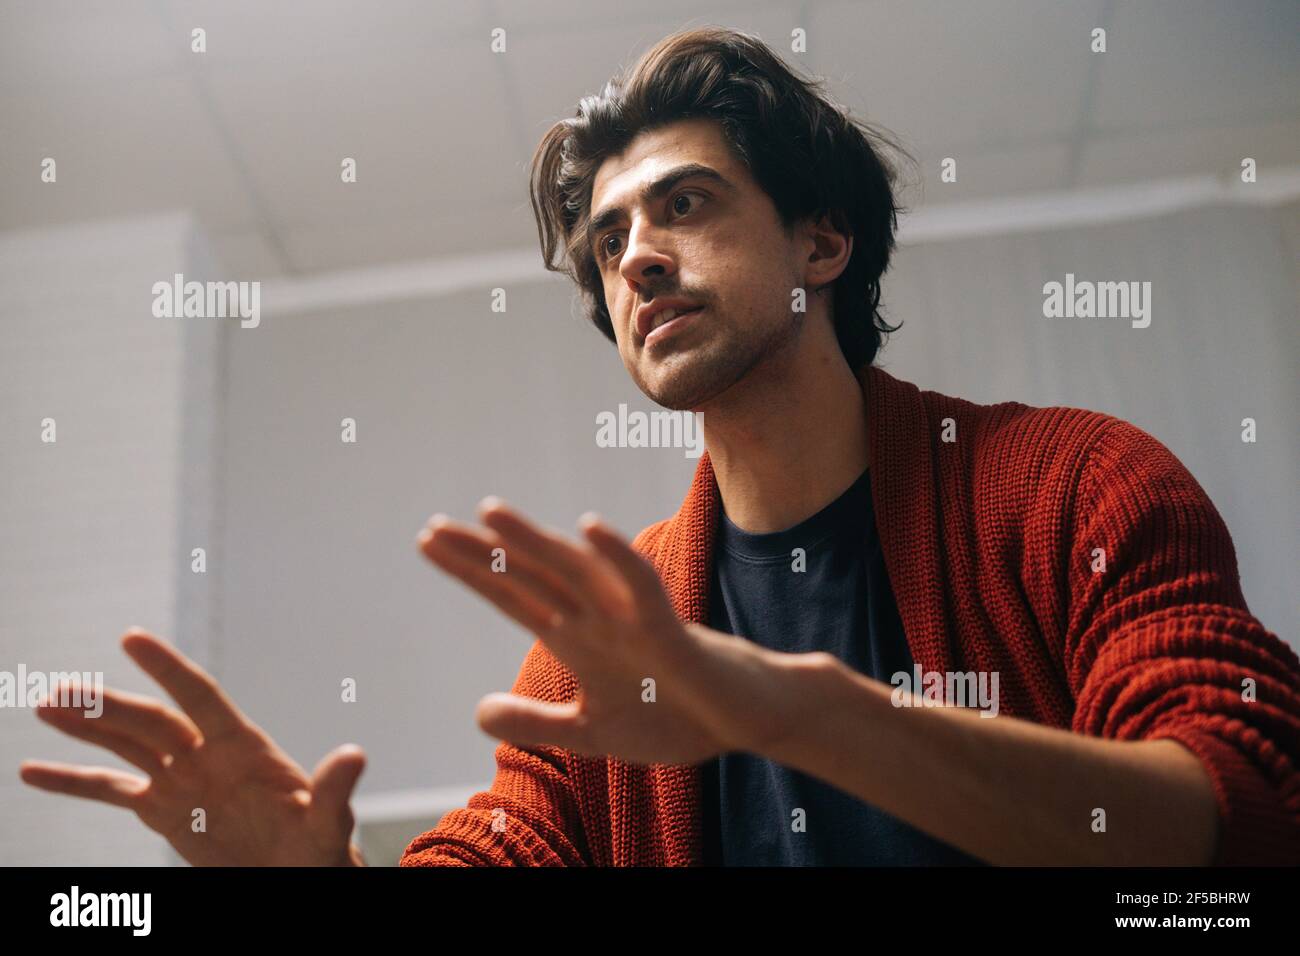 ow-angle view of professional music teacher explaining gesturing to student how to play on musical instrument during lesson. Stock Photo